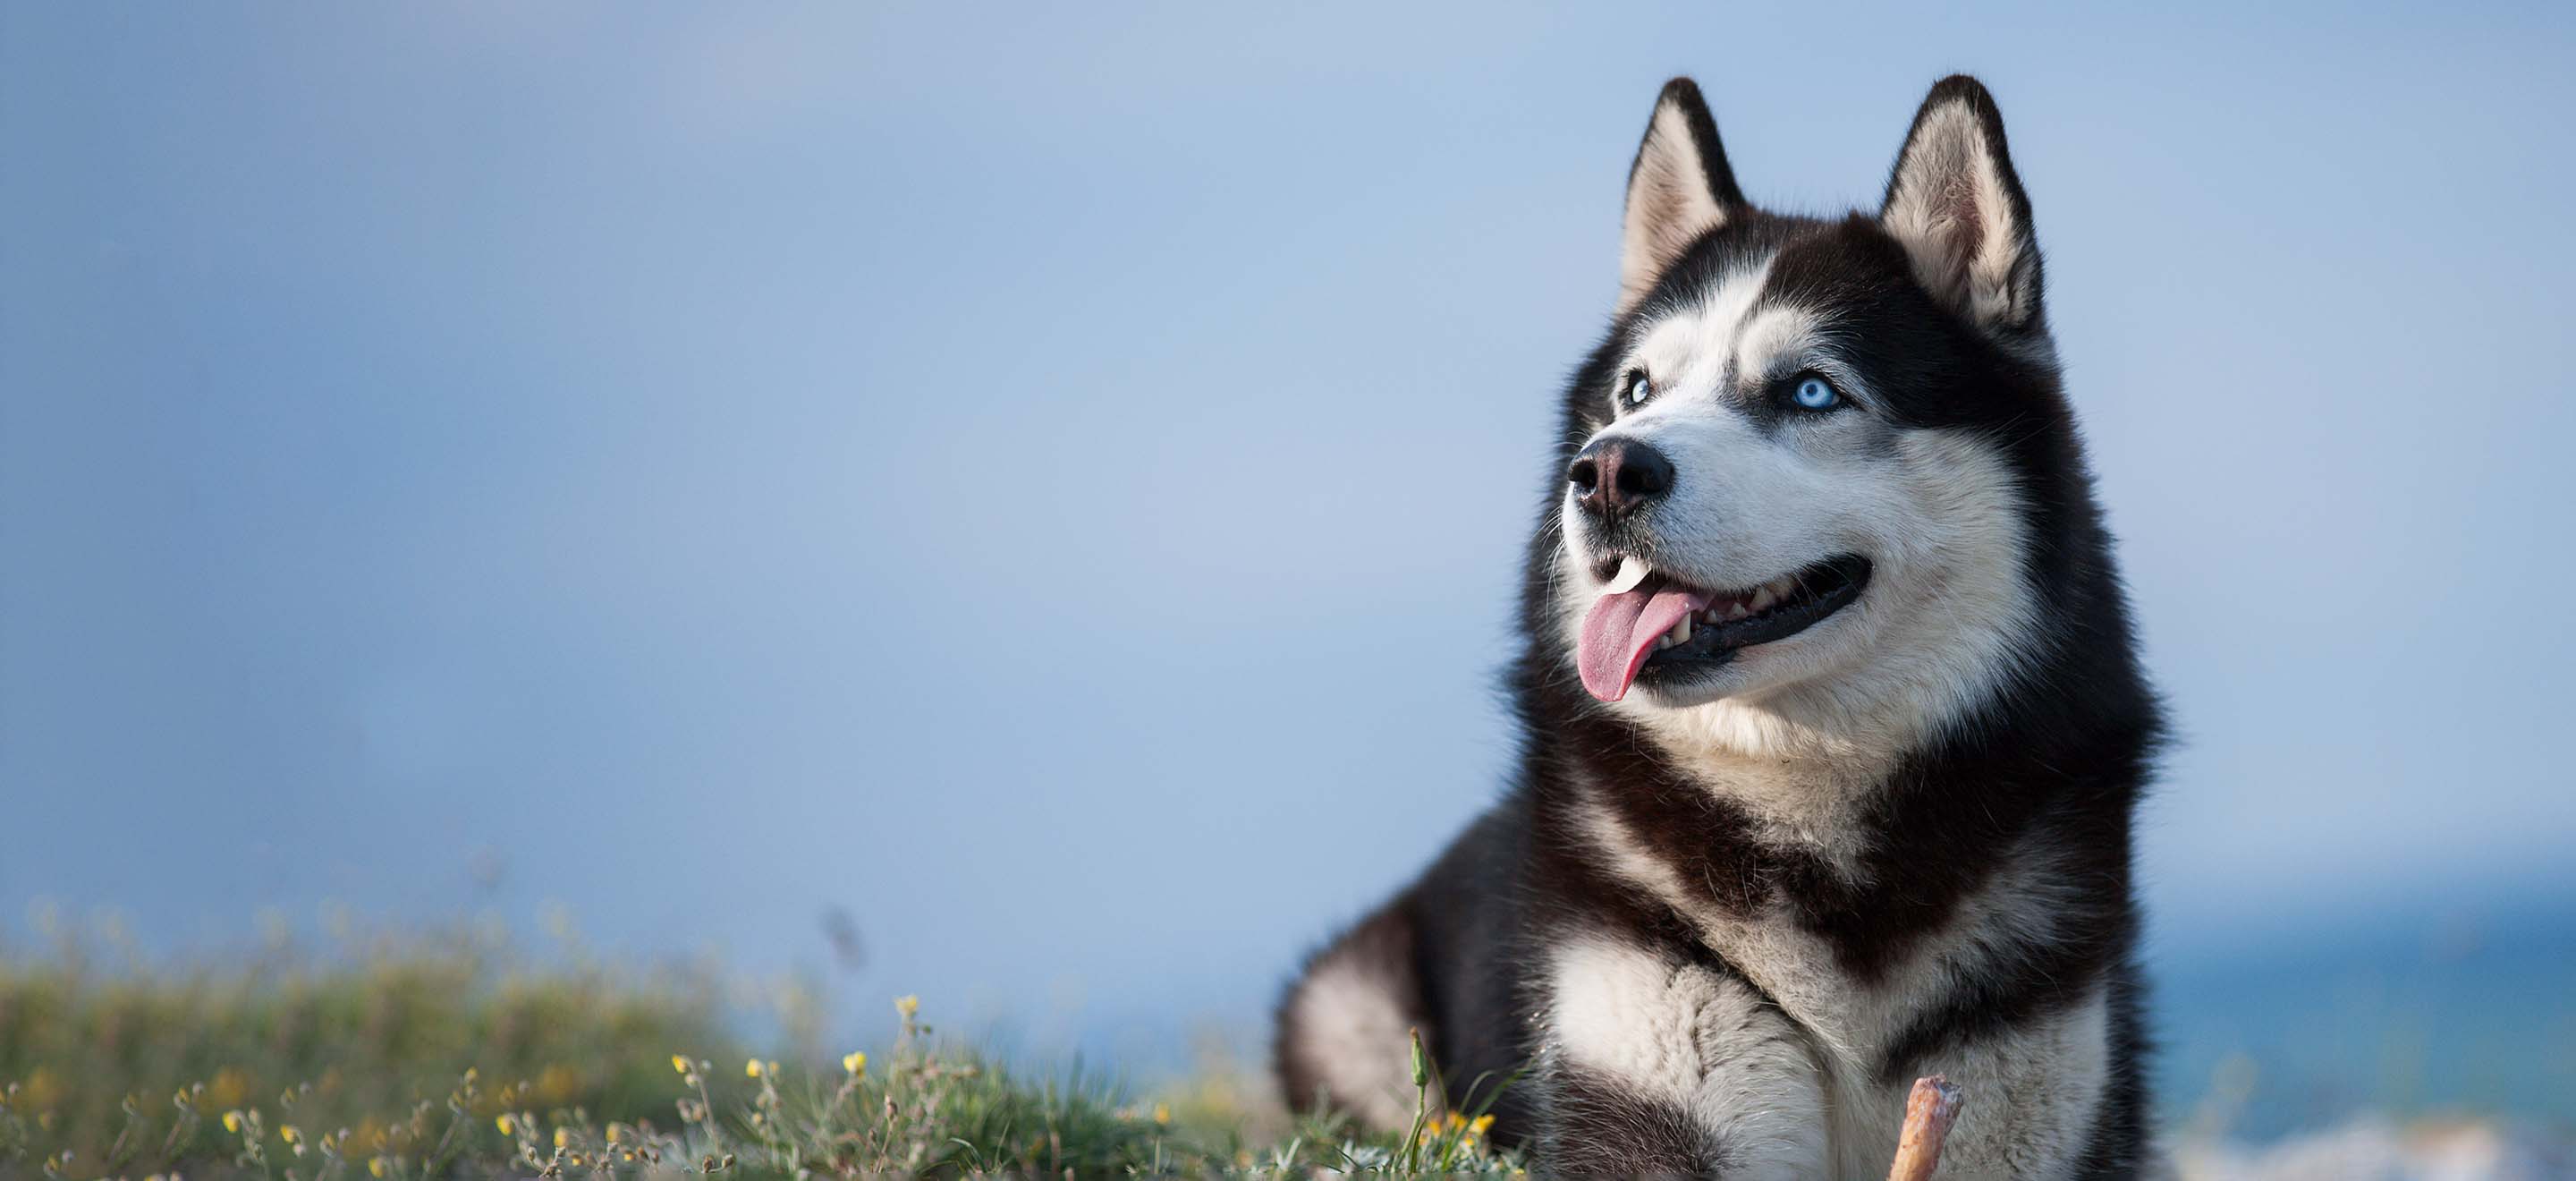 Black and white Husky dog laying on the grass outside image